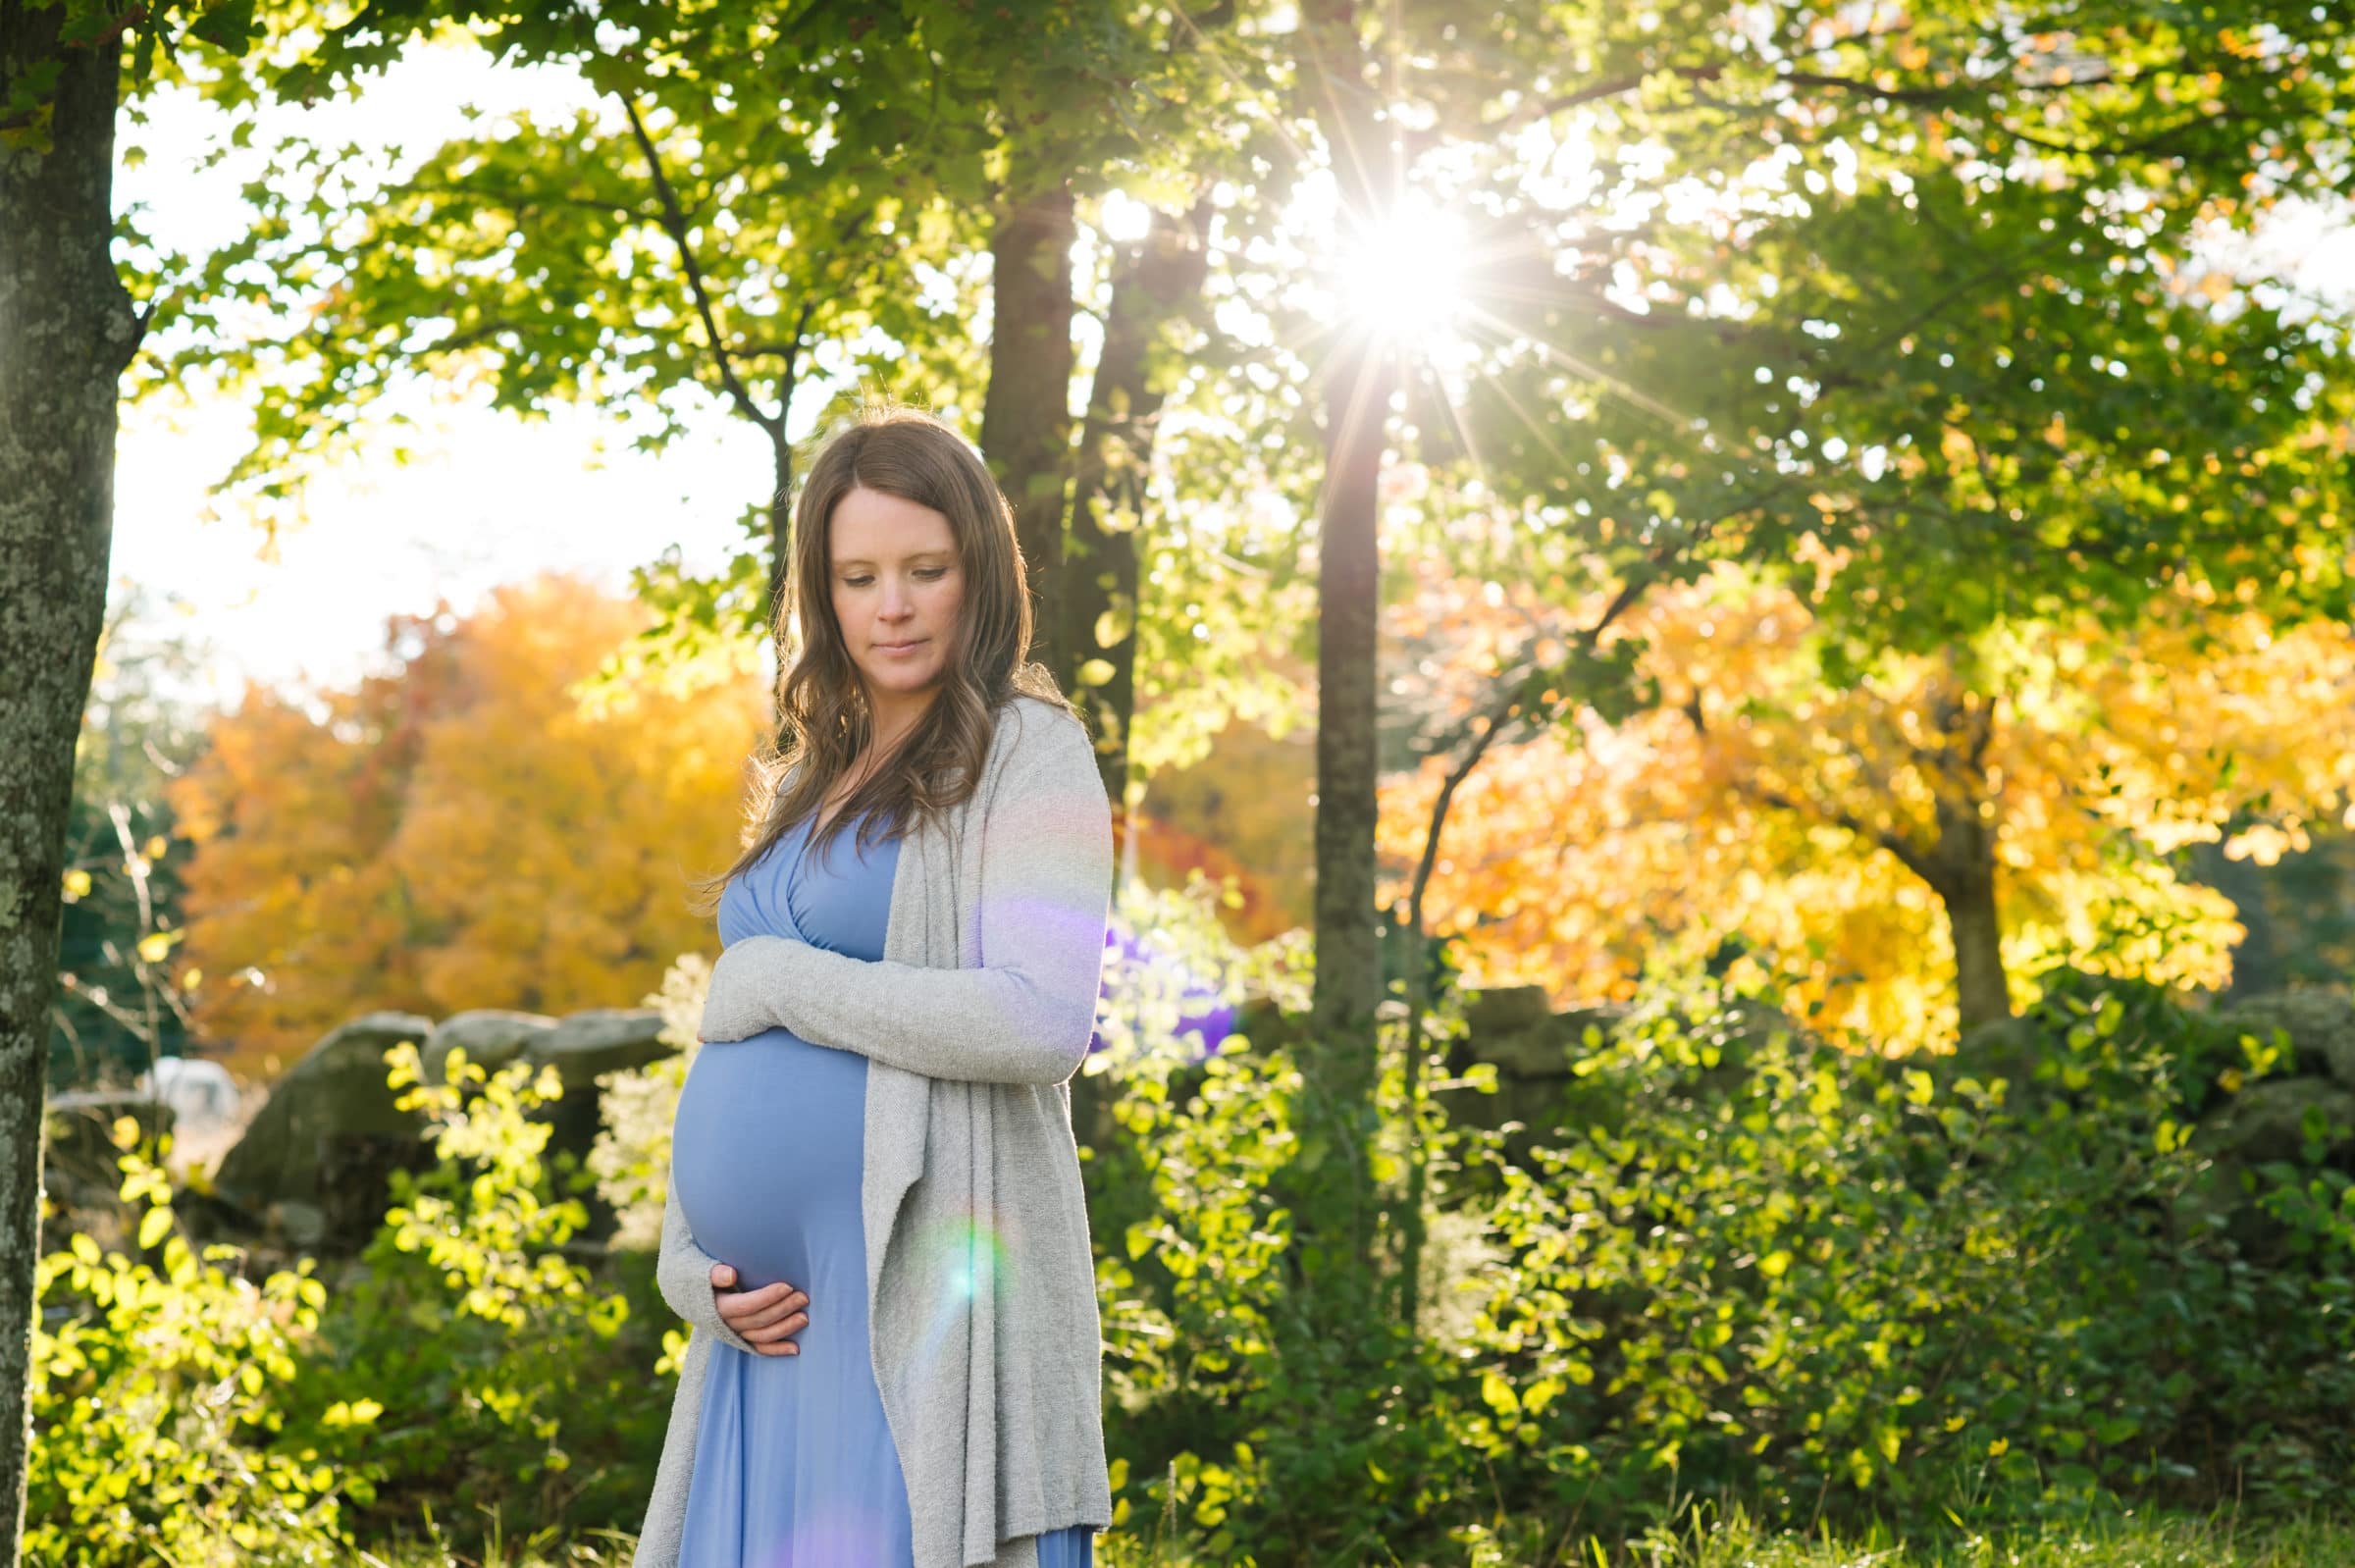 Lincoln MA maternity session at Minute Man National Park